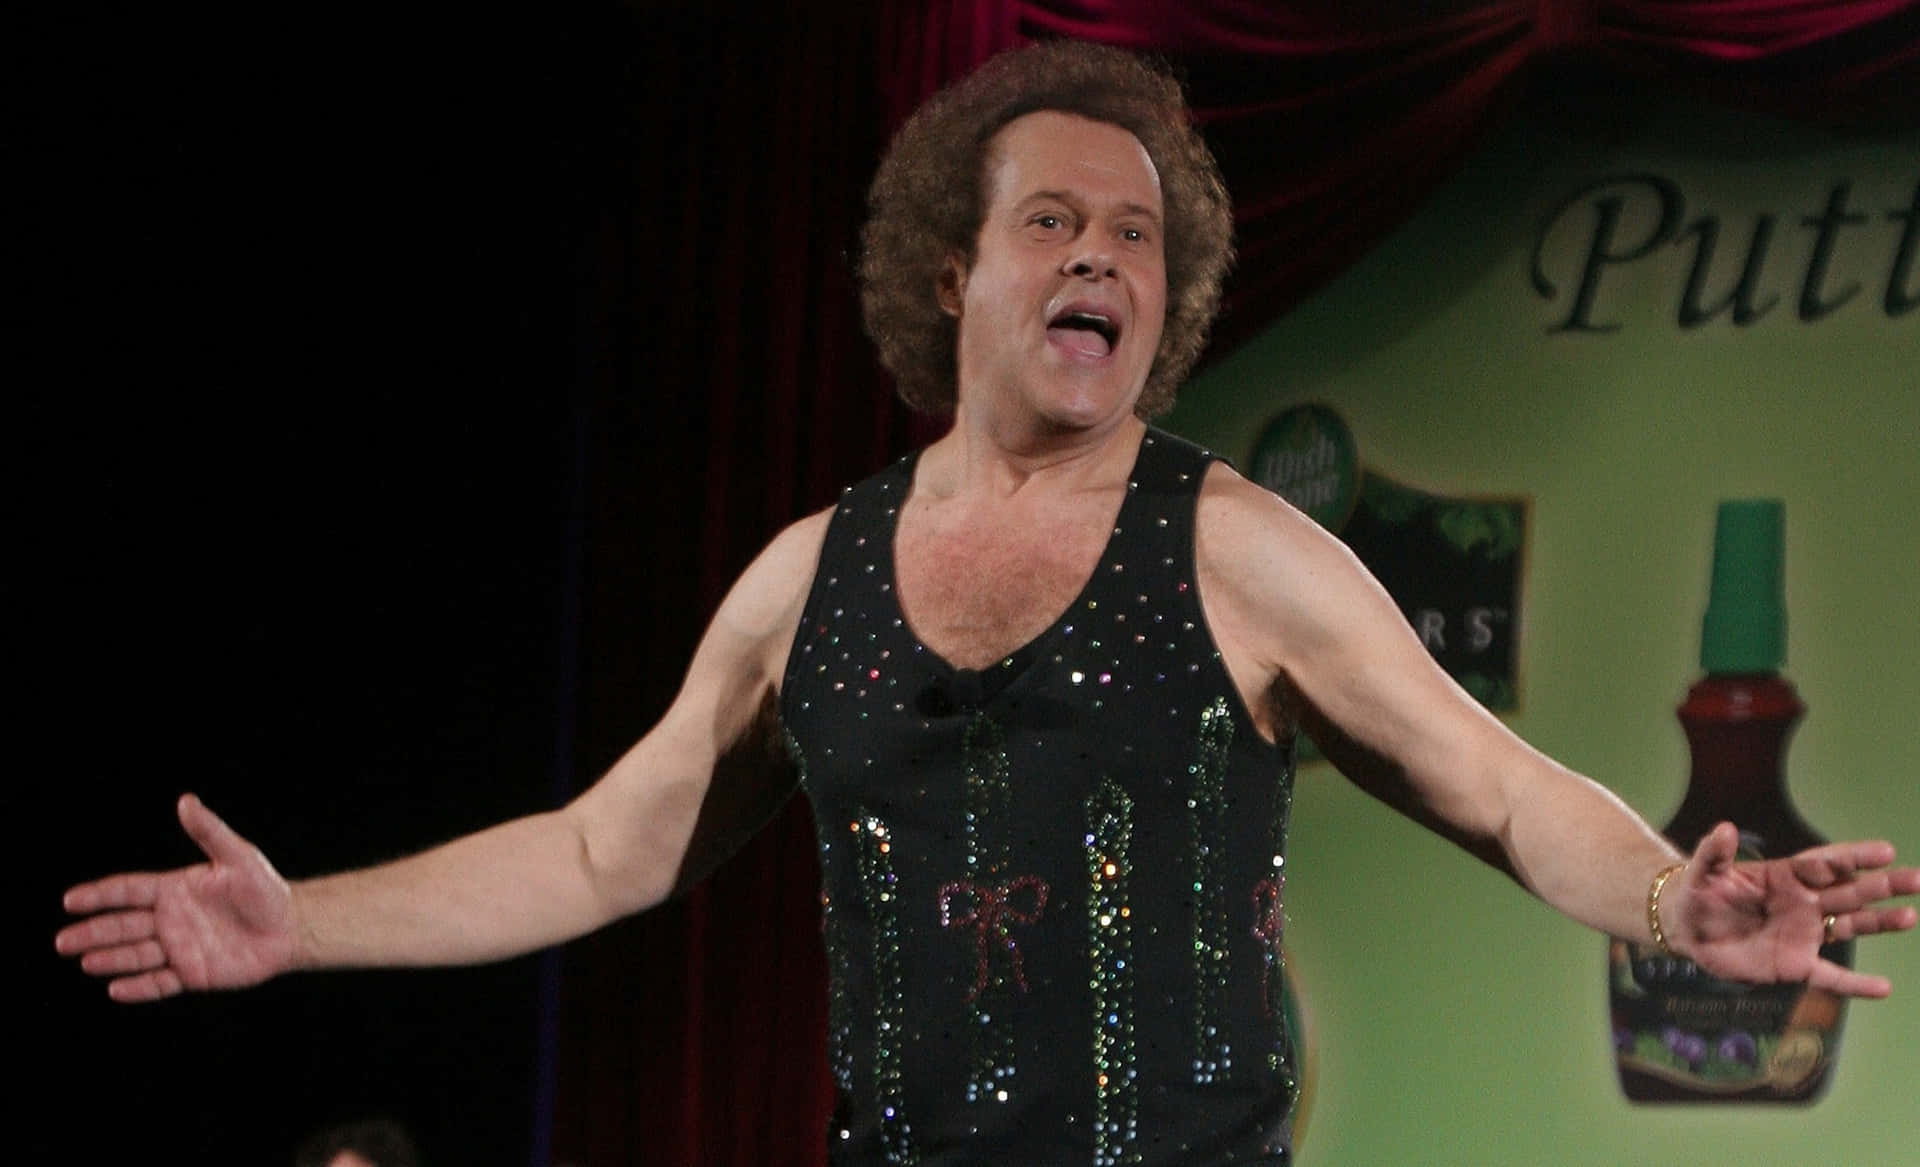 Richard Simmons On Stage Wallpaper